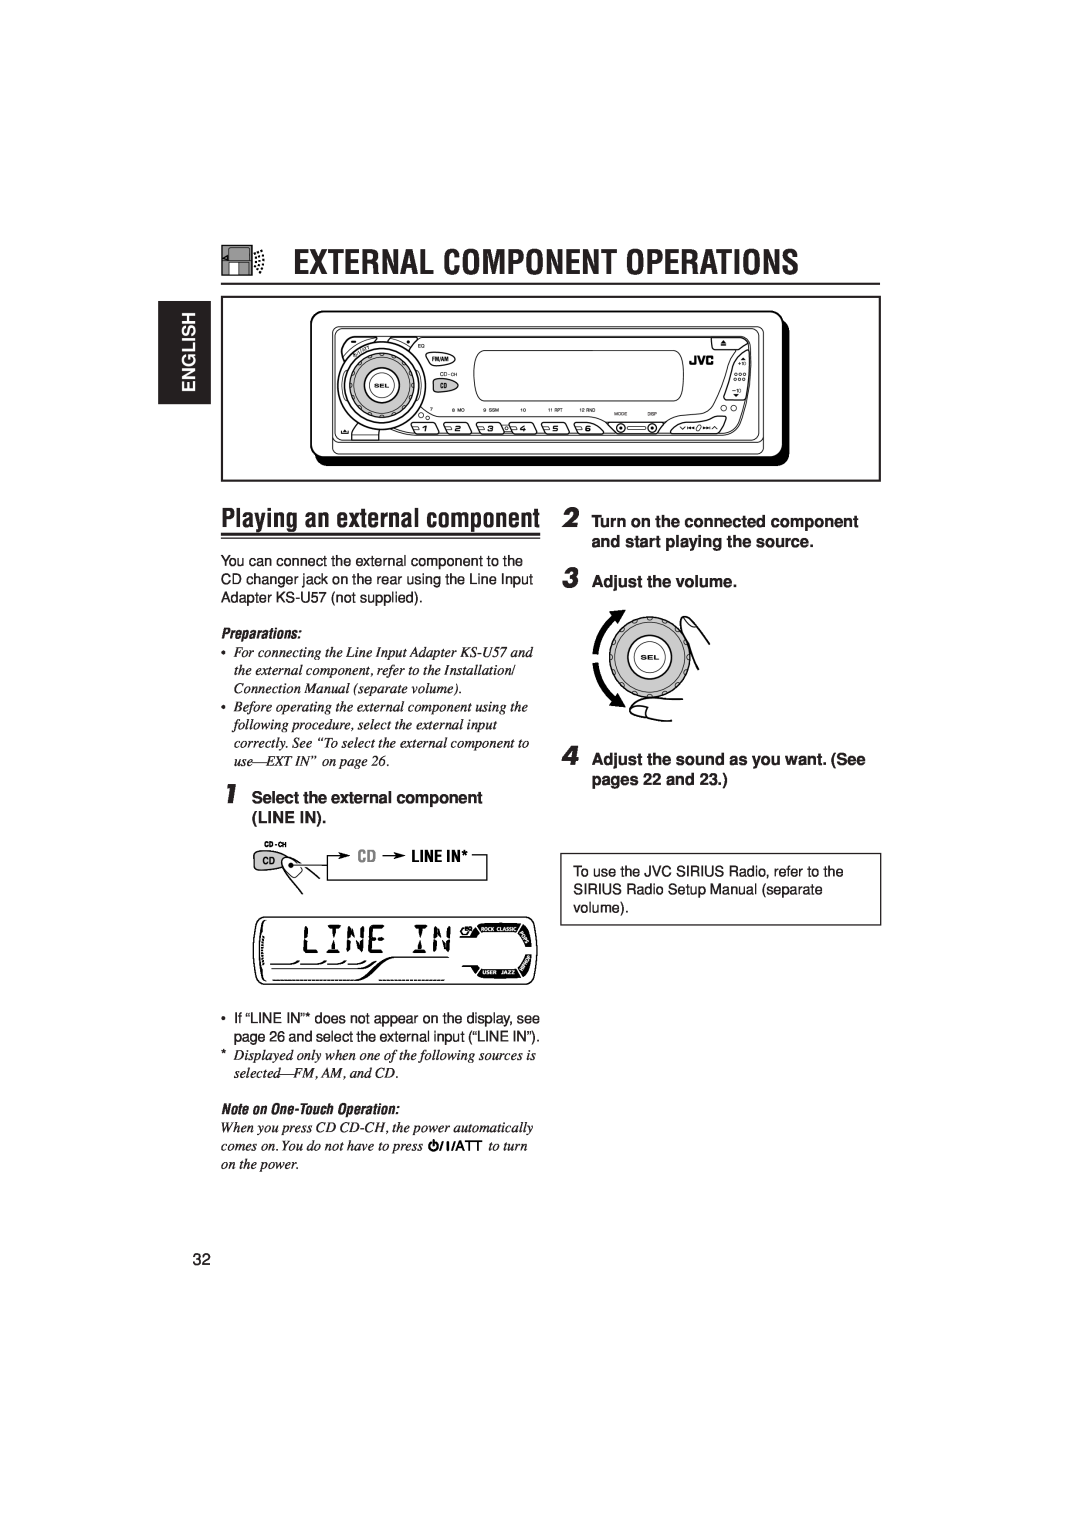 JVC KD-AR400 manual External Component Operations, Playing an external component, Cd Line In, English, Preparations 